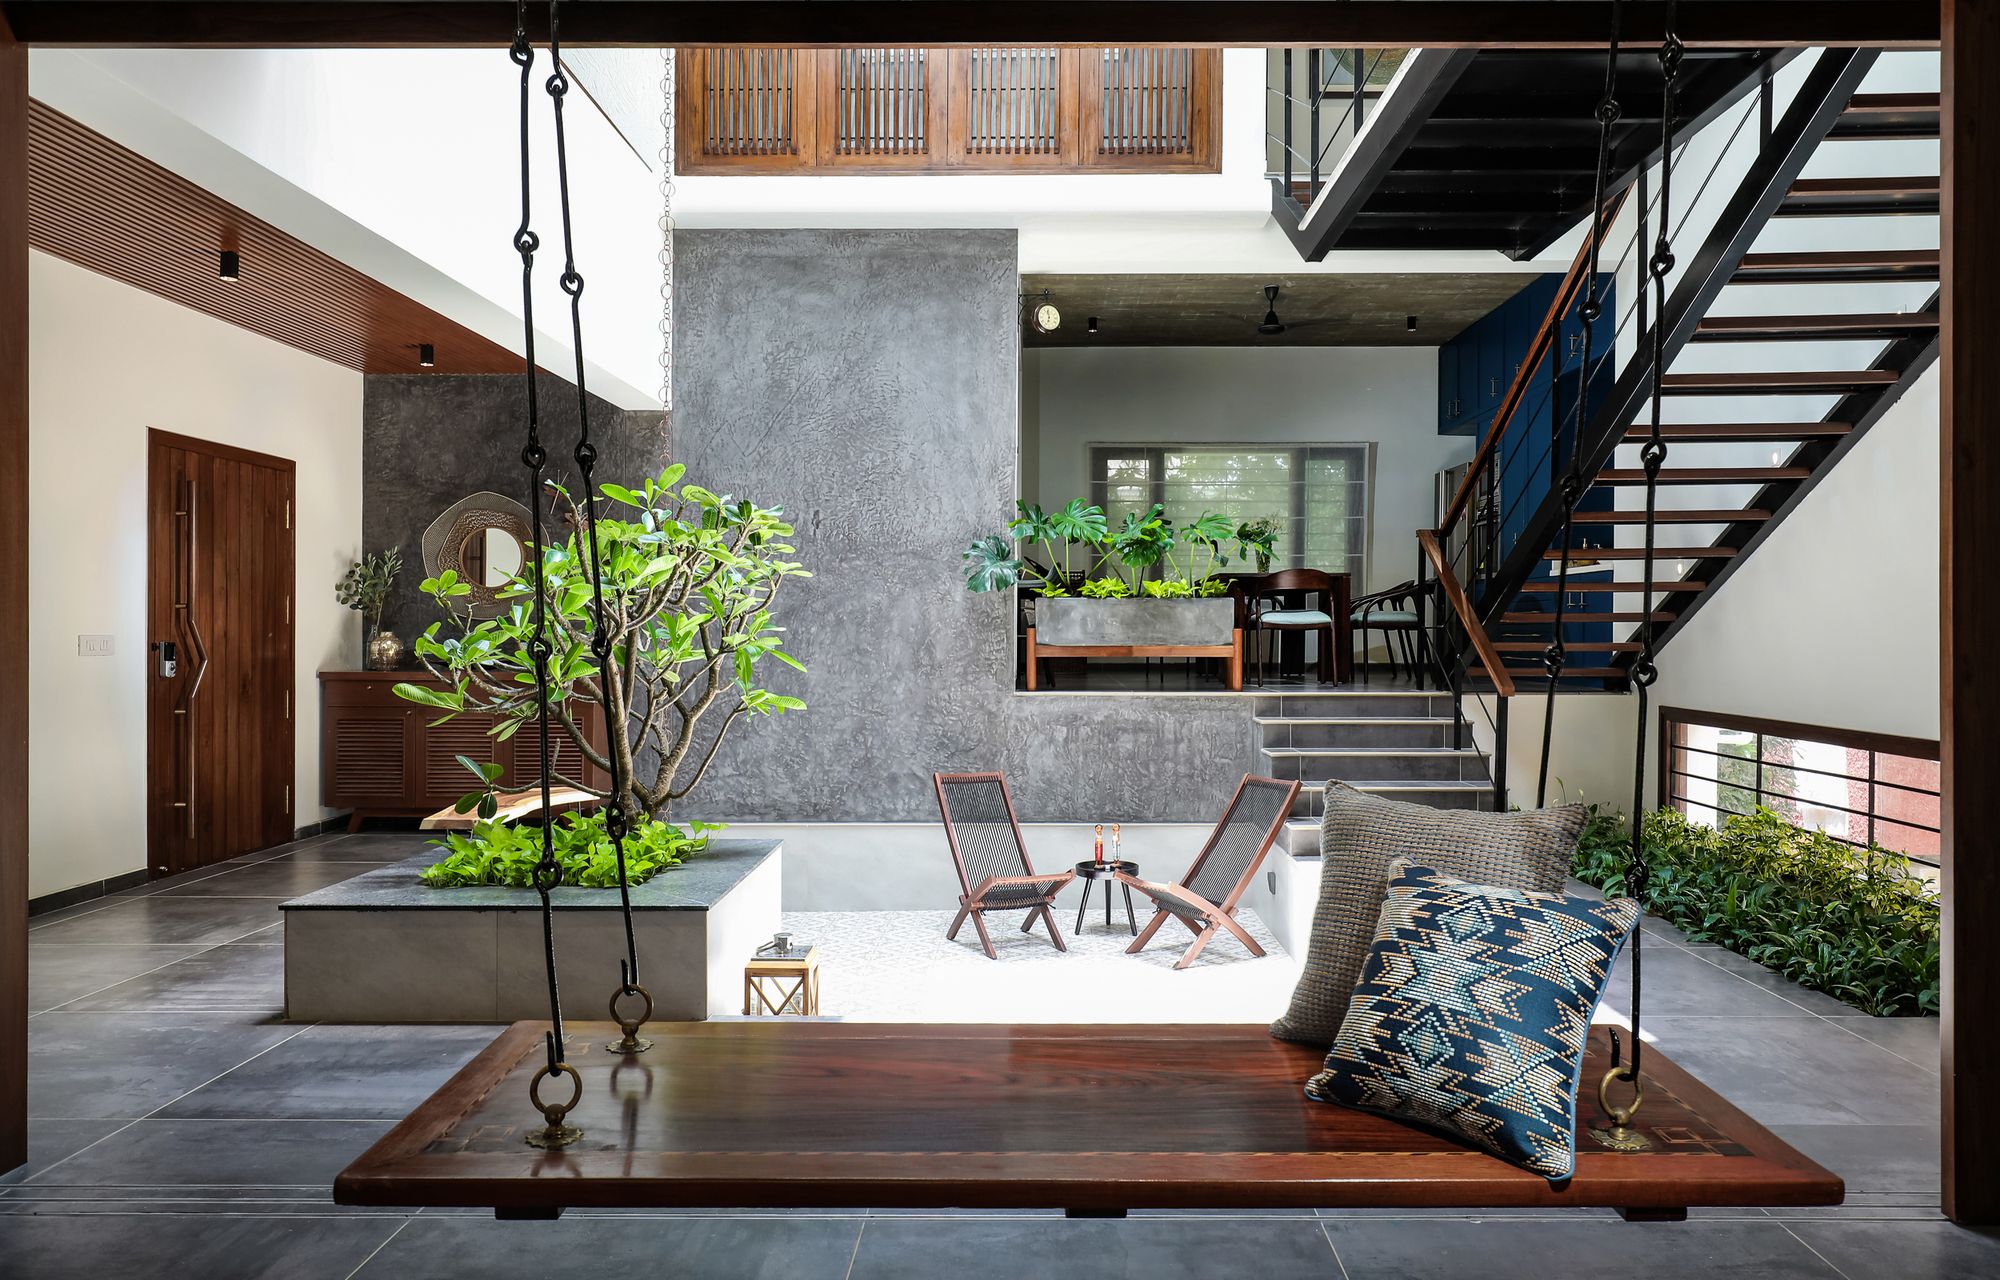 This contemporary house in Chennai is grounded in traditional South-Indian architecture